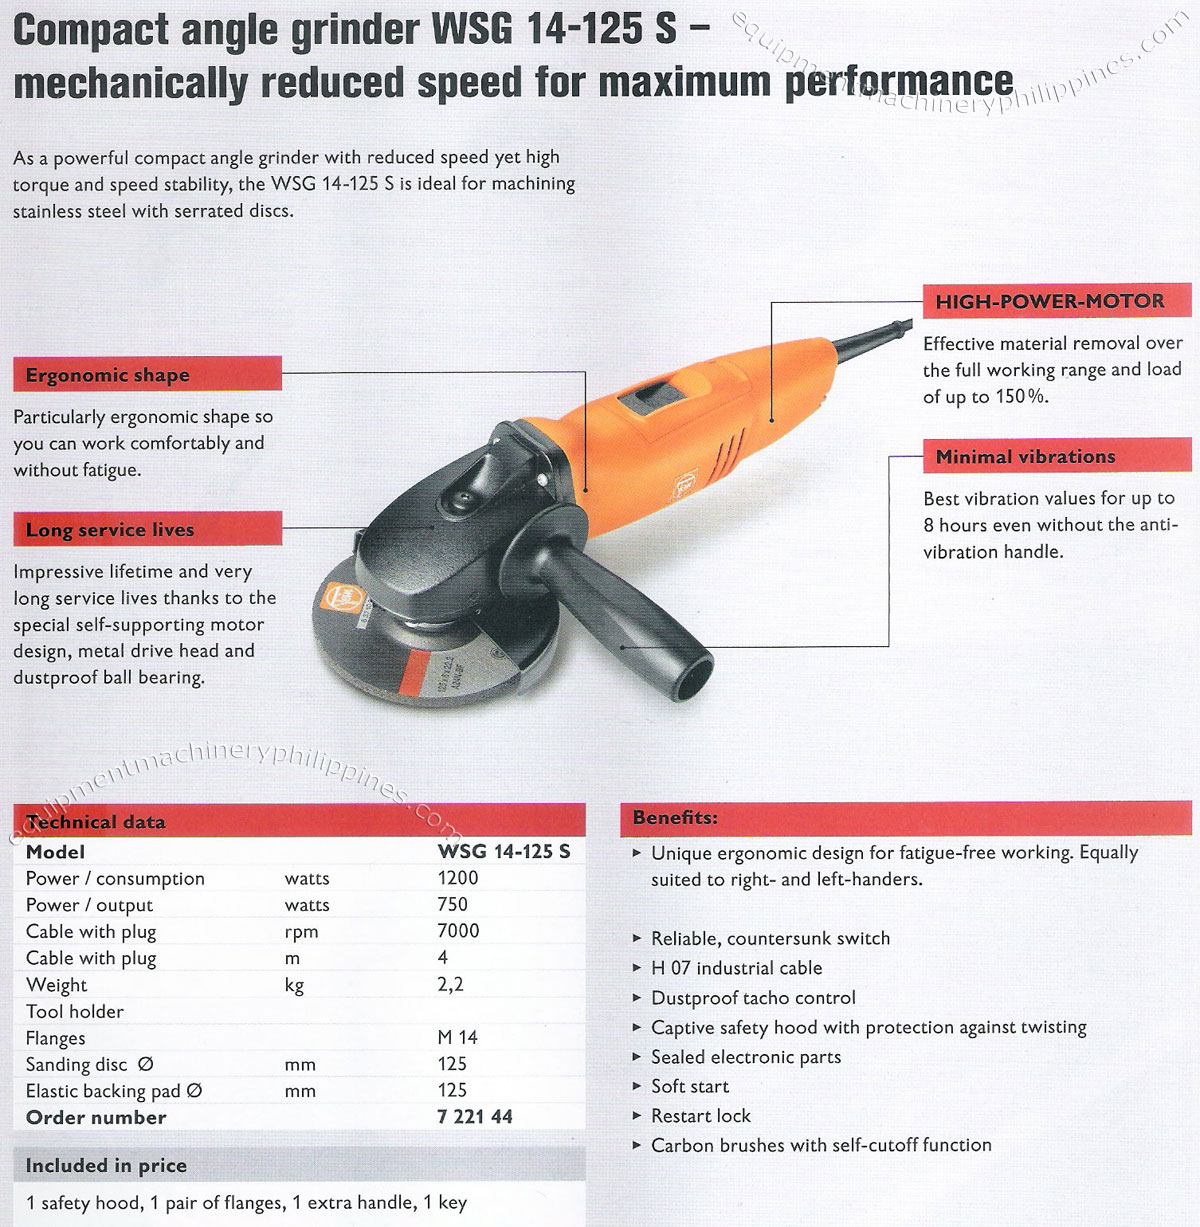 Compact Angle Grinder WSG 14 125 S with Reduced Speed yet High Torque and Speed Stability